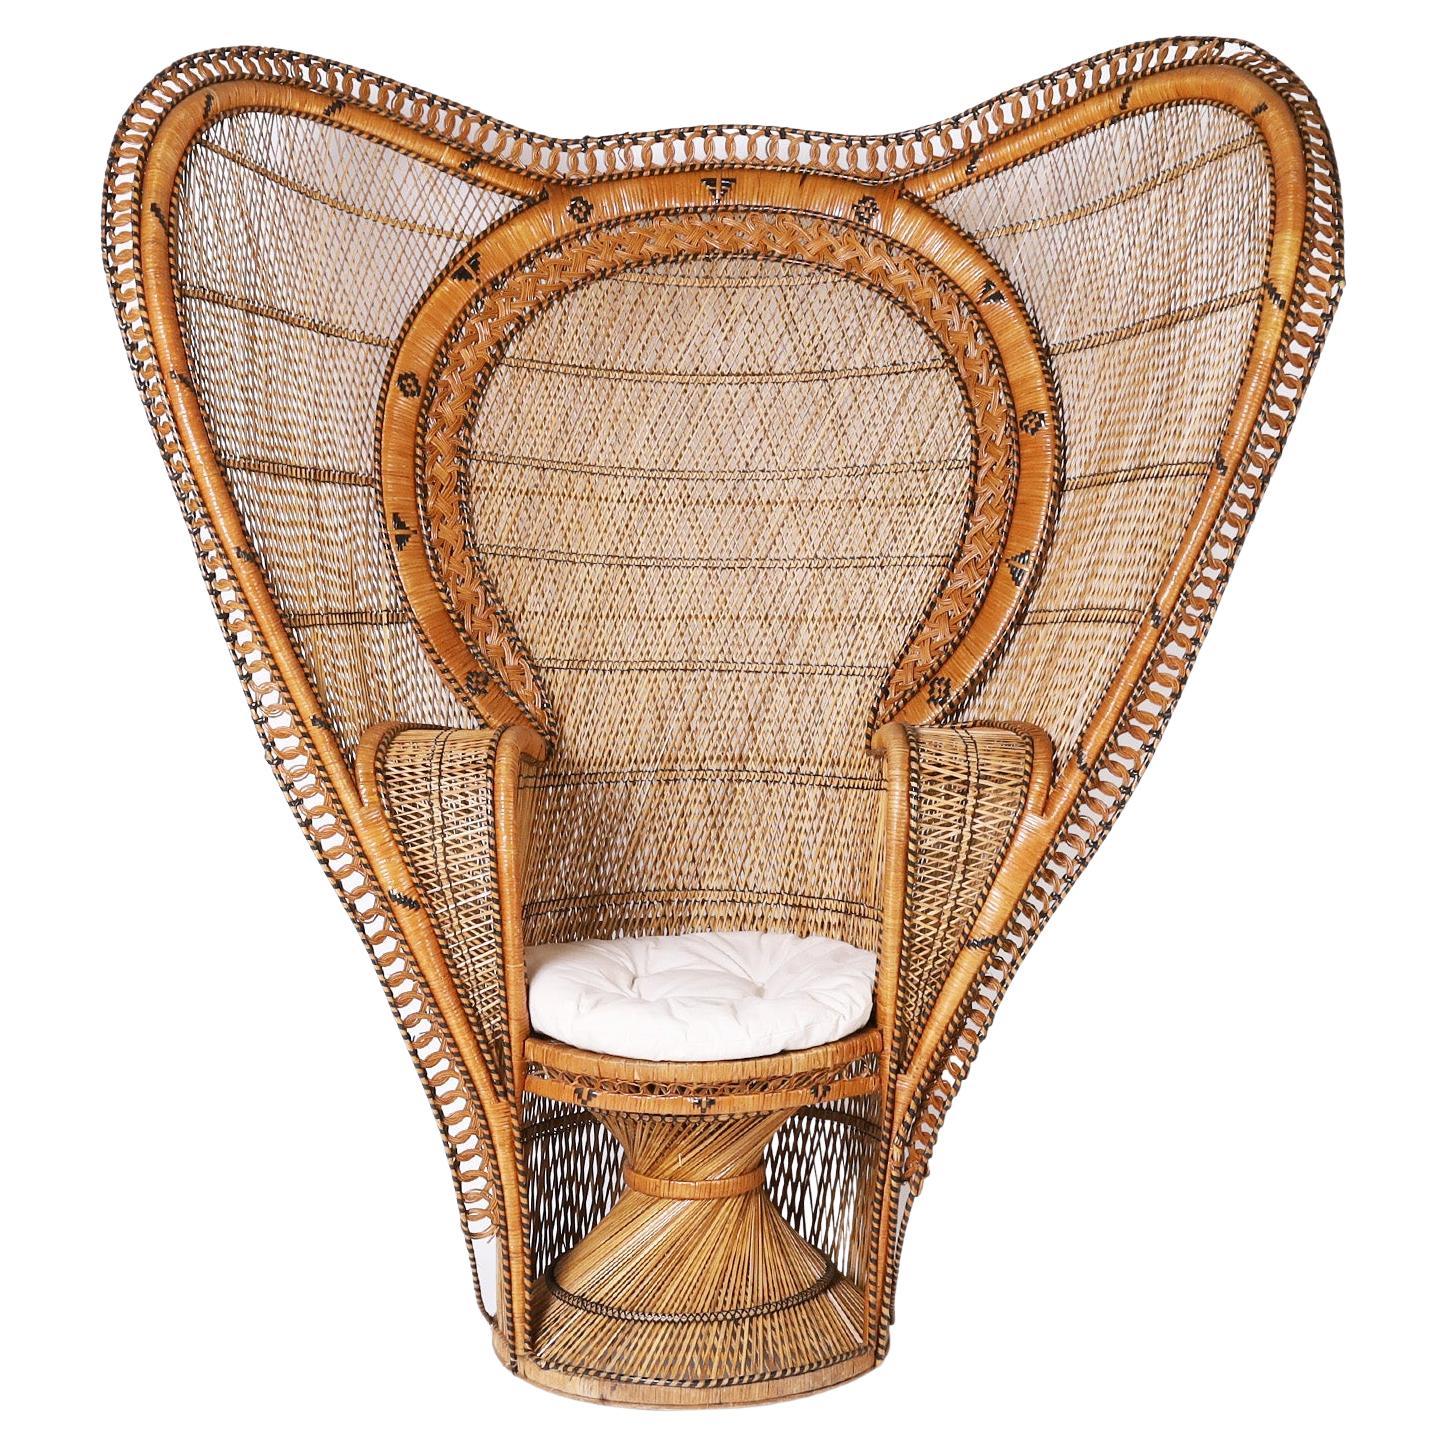 Fauteuil anglo-indien paon cobra